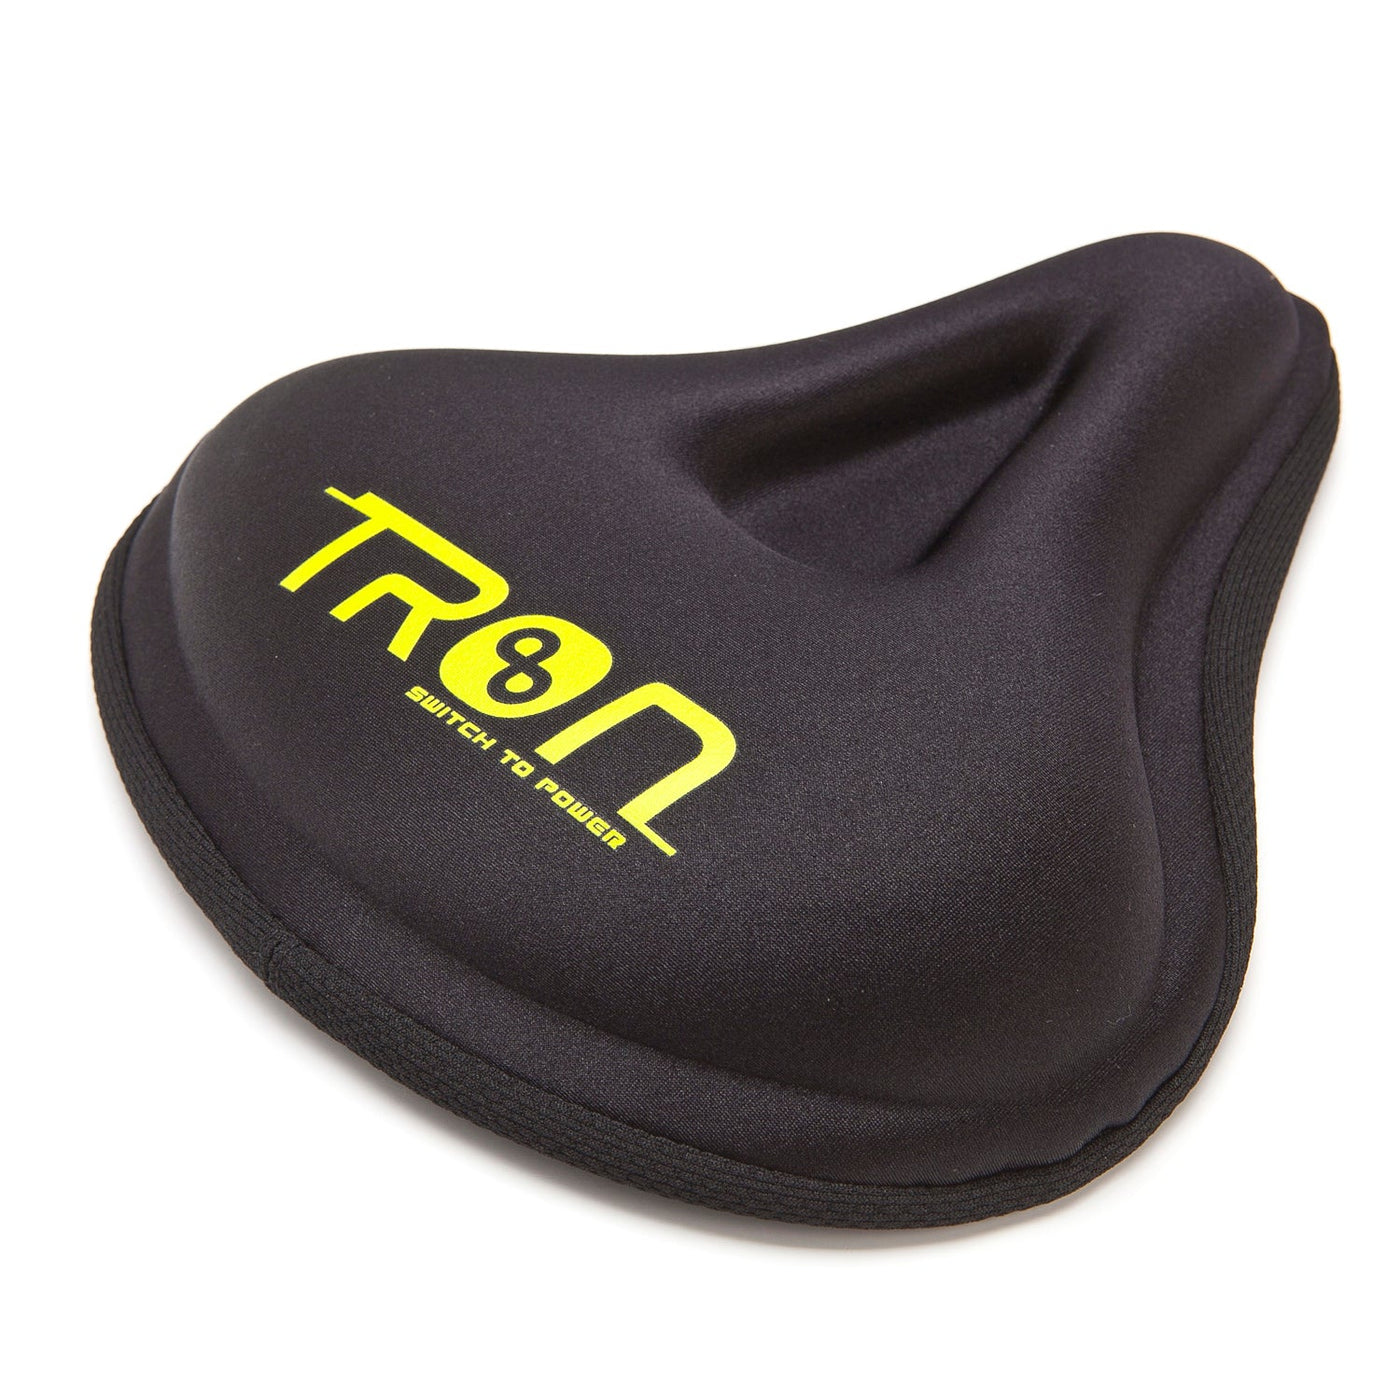 Tron Bicycle Gel Saddle Cover 244-269 X 254-279 Mm VSA20-VLC030 - Cyclop.in